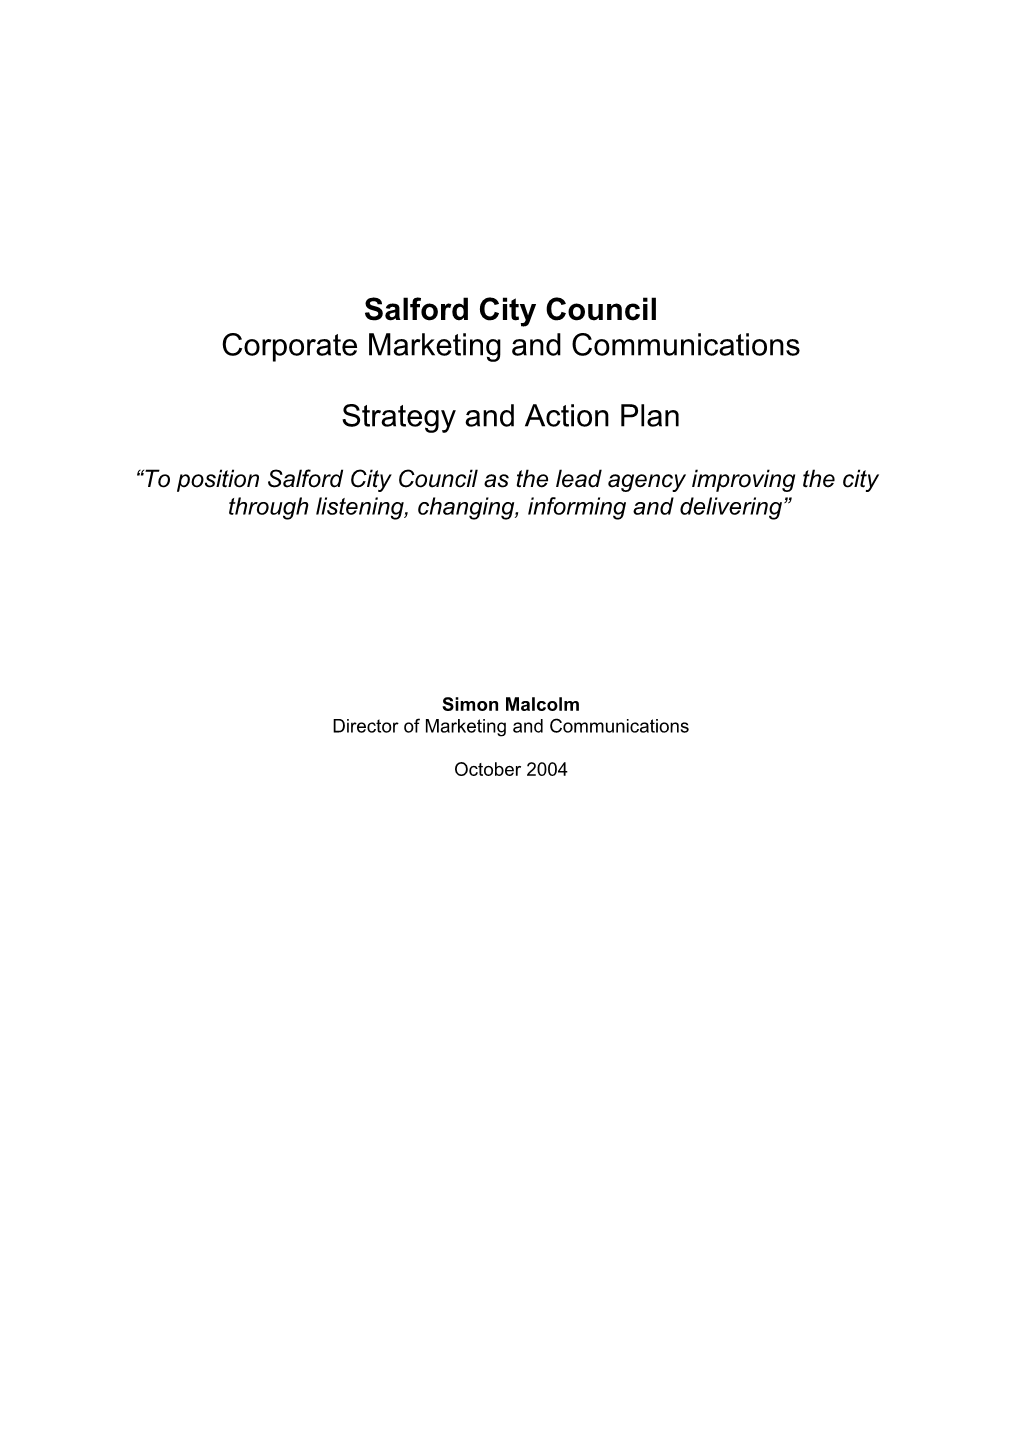 Salford City Council Marketing - Managing the Business